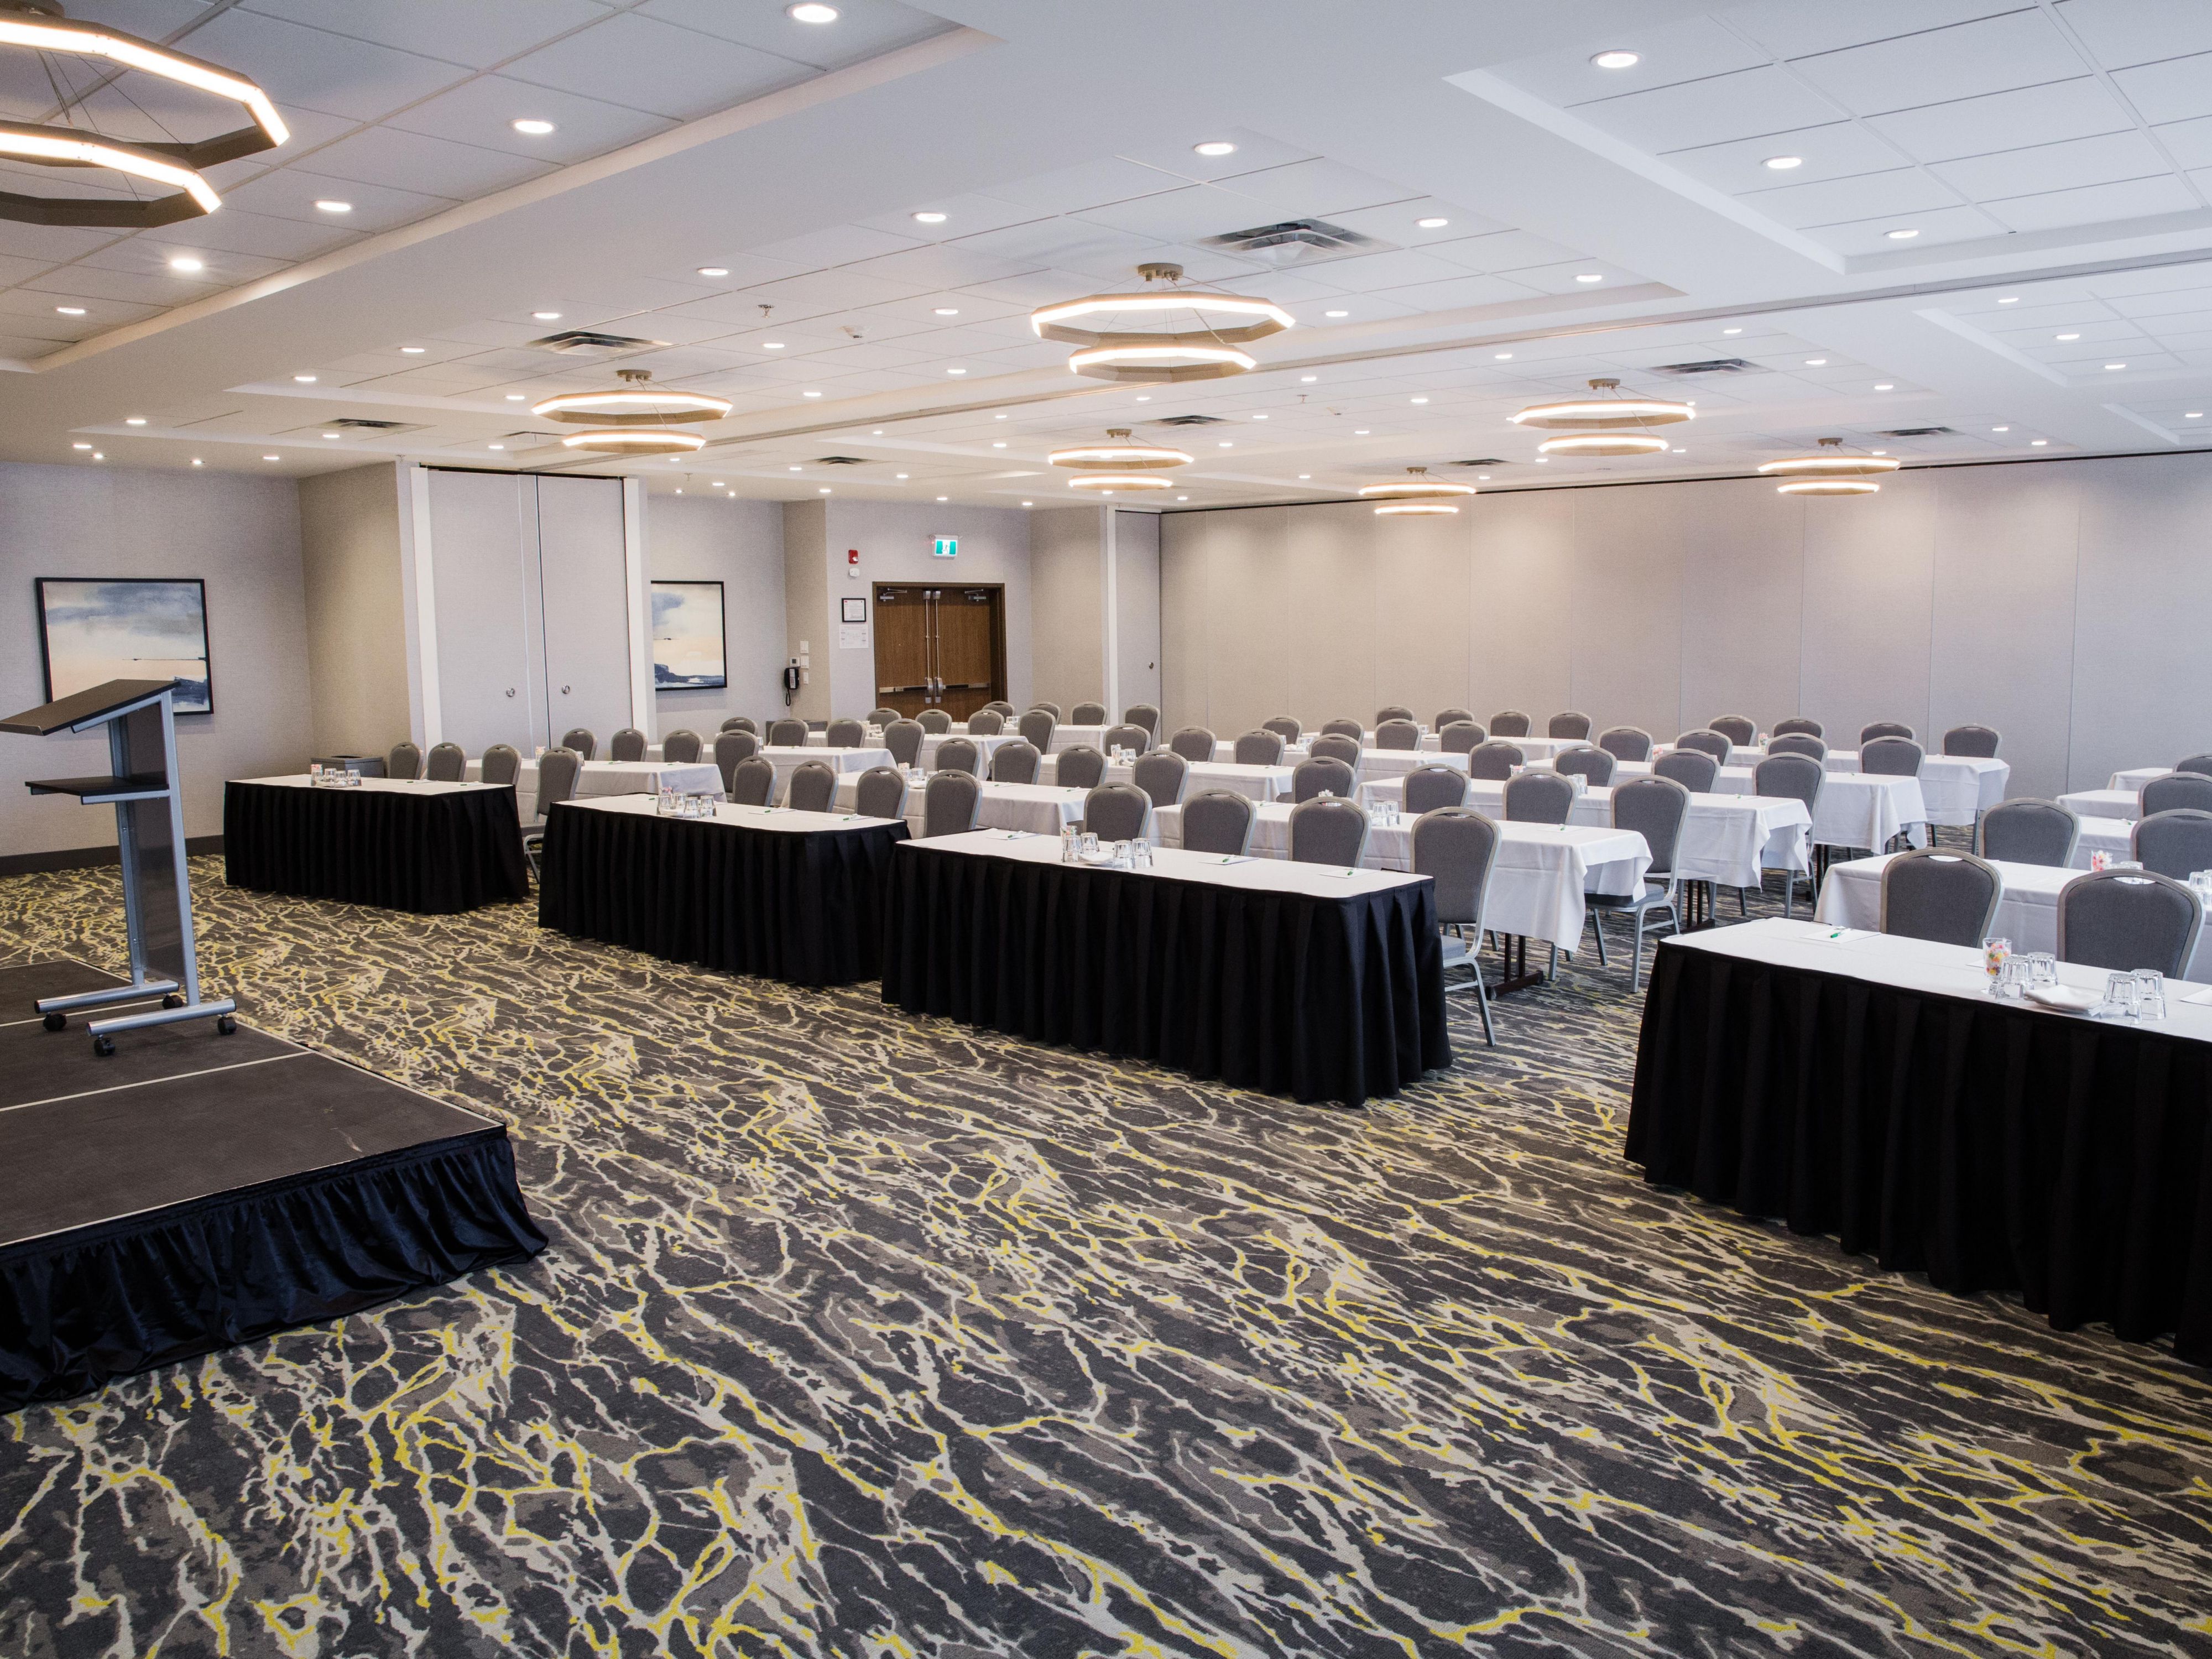 Coming to Calgary on business or looking to plan that special event? Contact our Sales & Catering team to help plan everything. We have over 7000 square feet of flexible meeting space featuring a modern design showcasing natural light. Our 5200 square foot ballroom is free of obstructions.